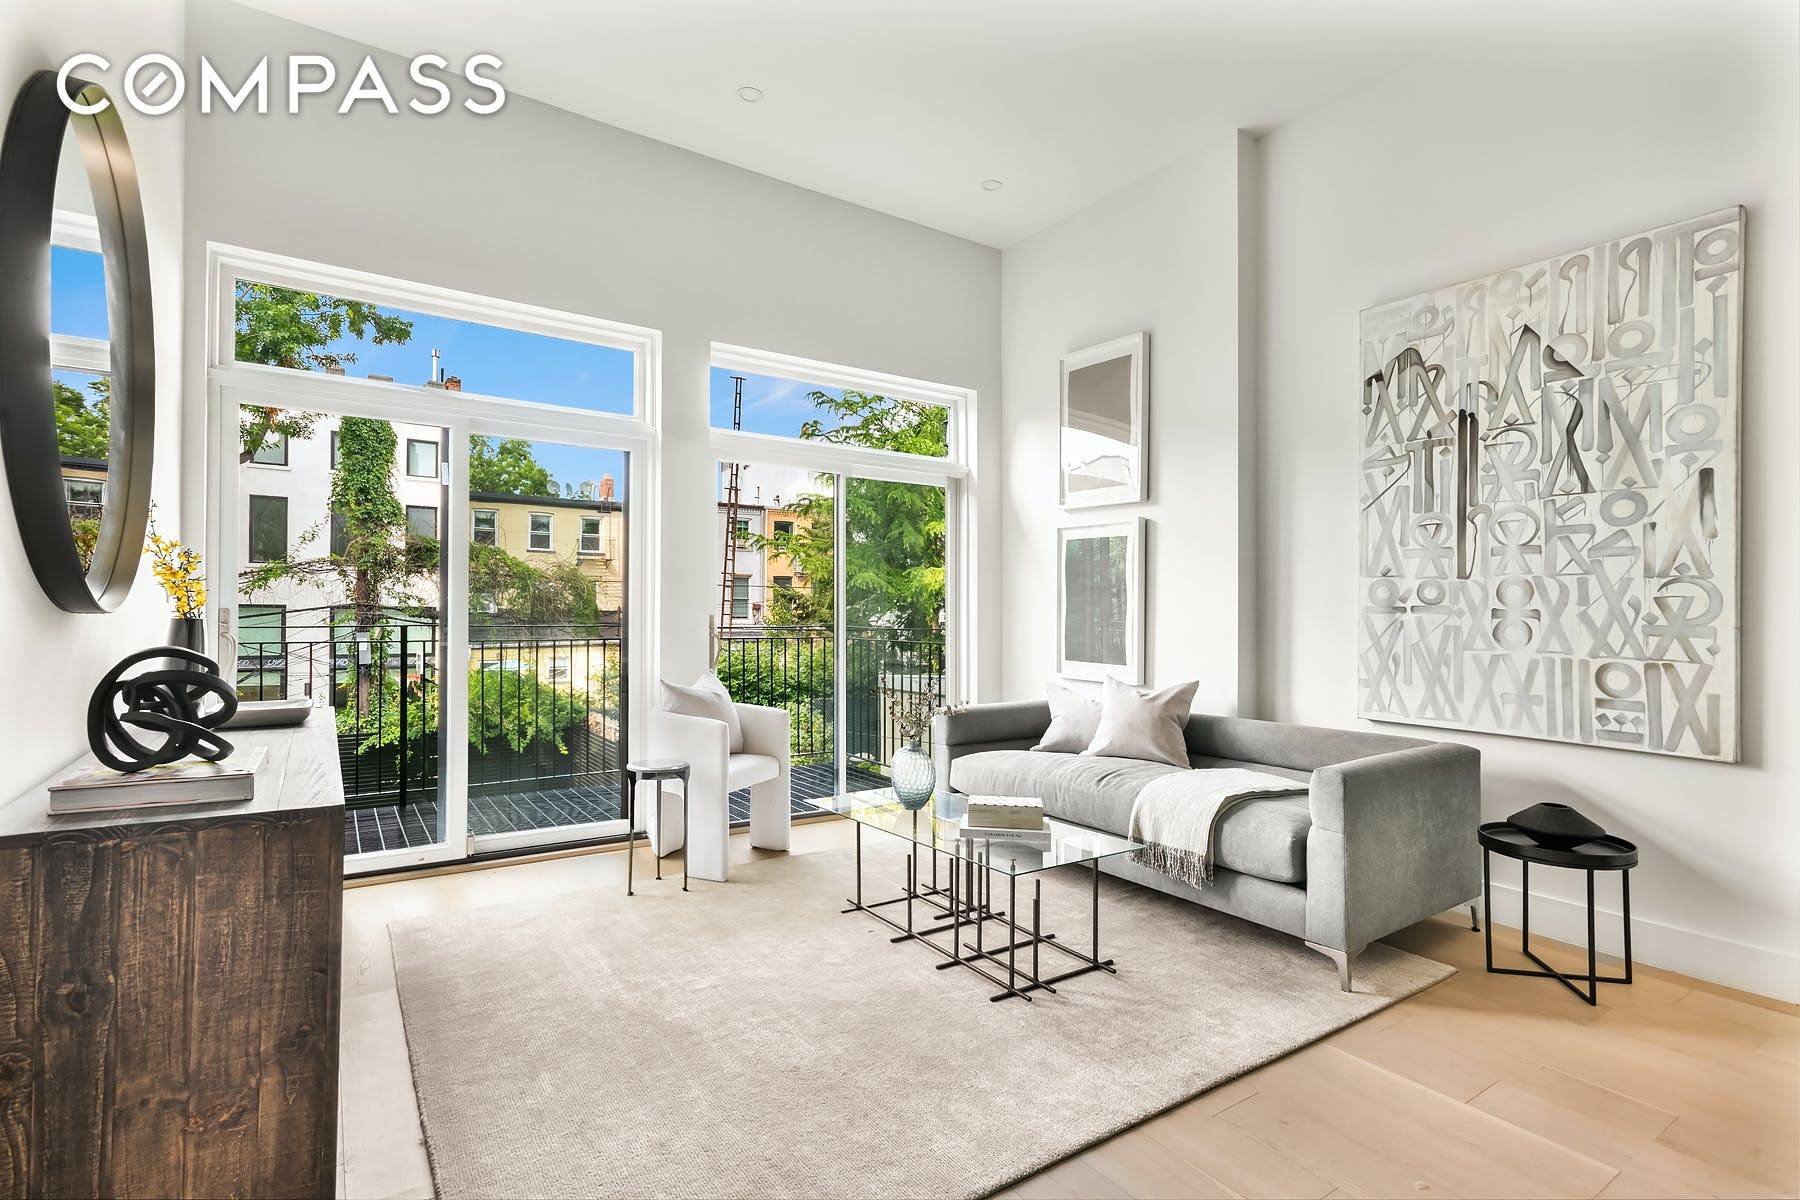 Introducing 279 Sackett Street, a distinct collection of four newly completed luxury condominium residences located on one of Carroll Garden s most highly desired tree lined blocks.